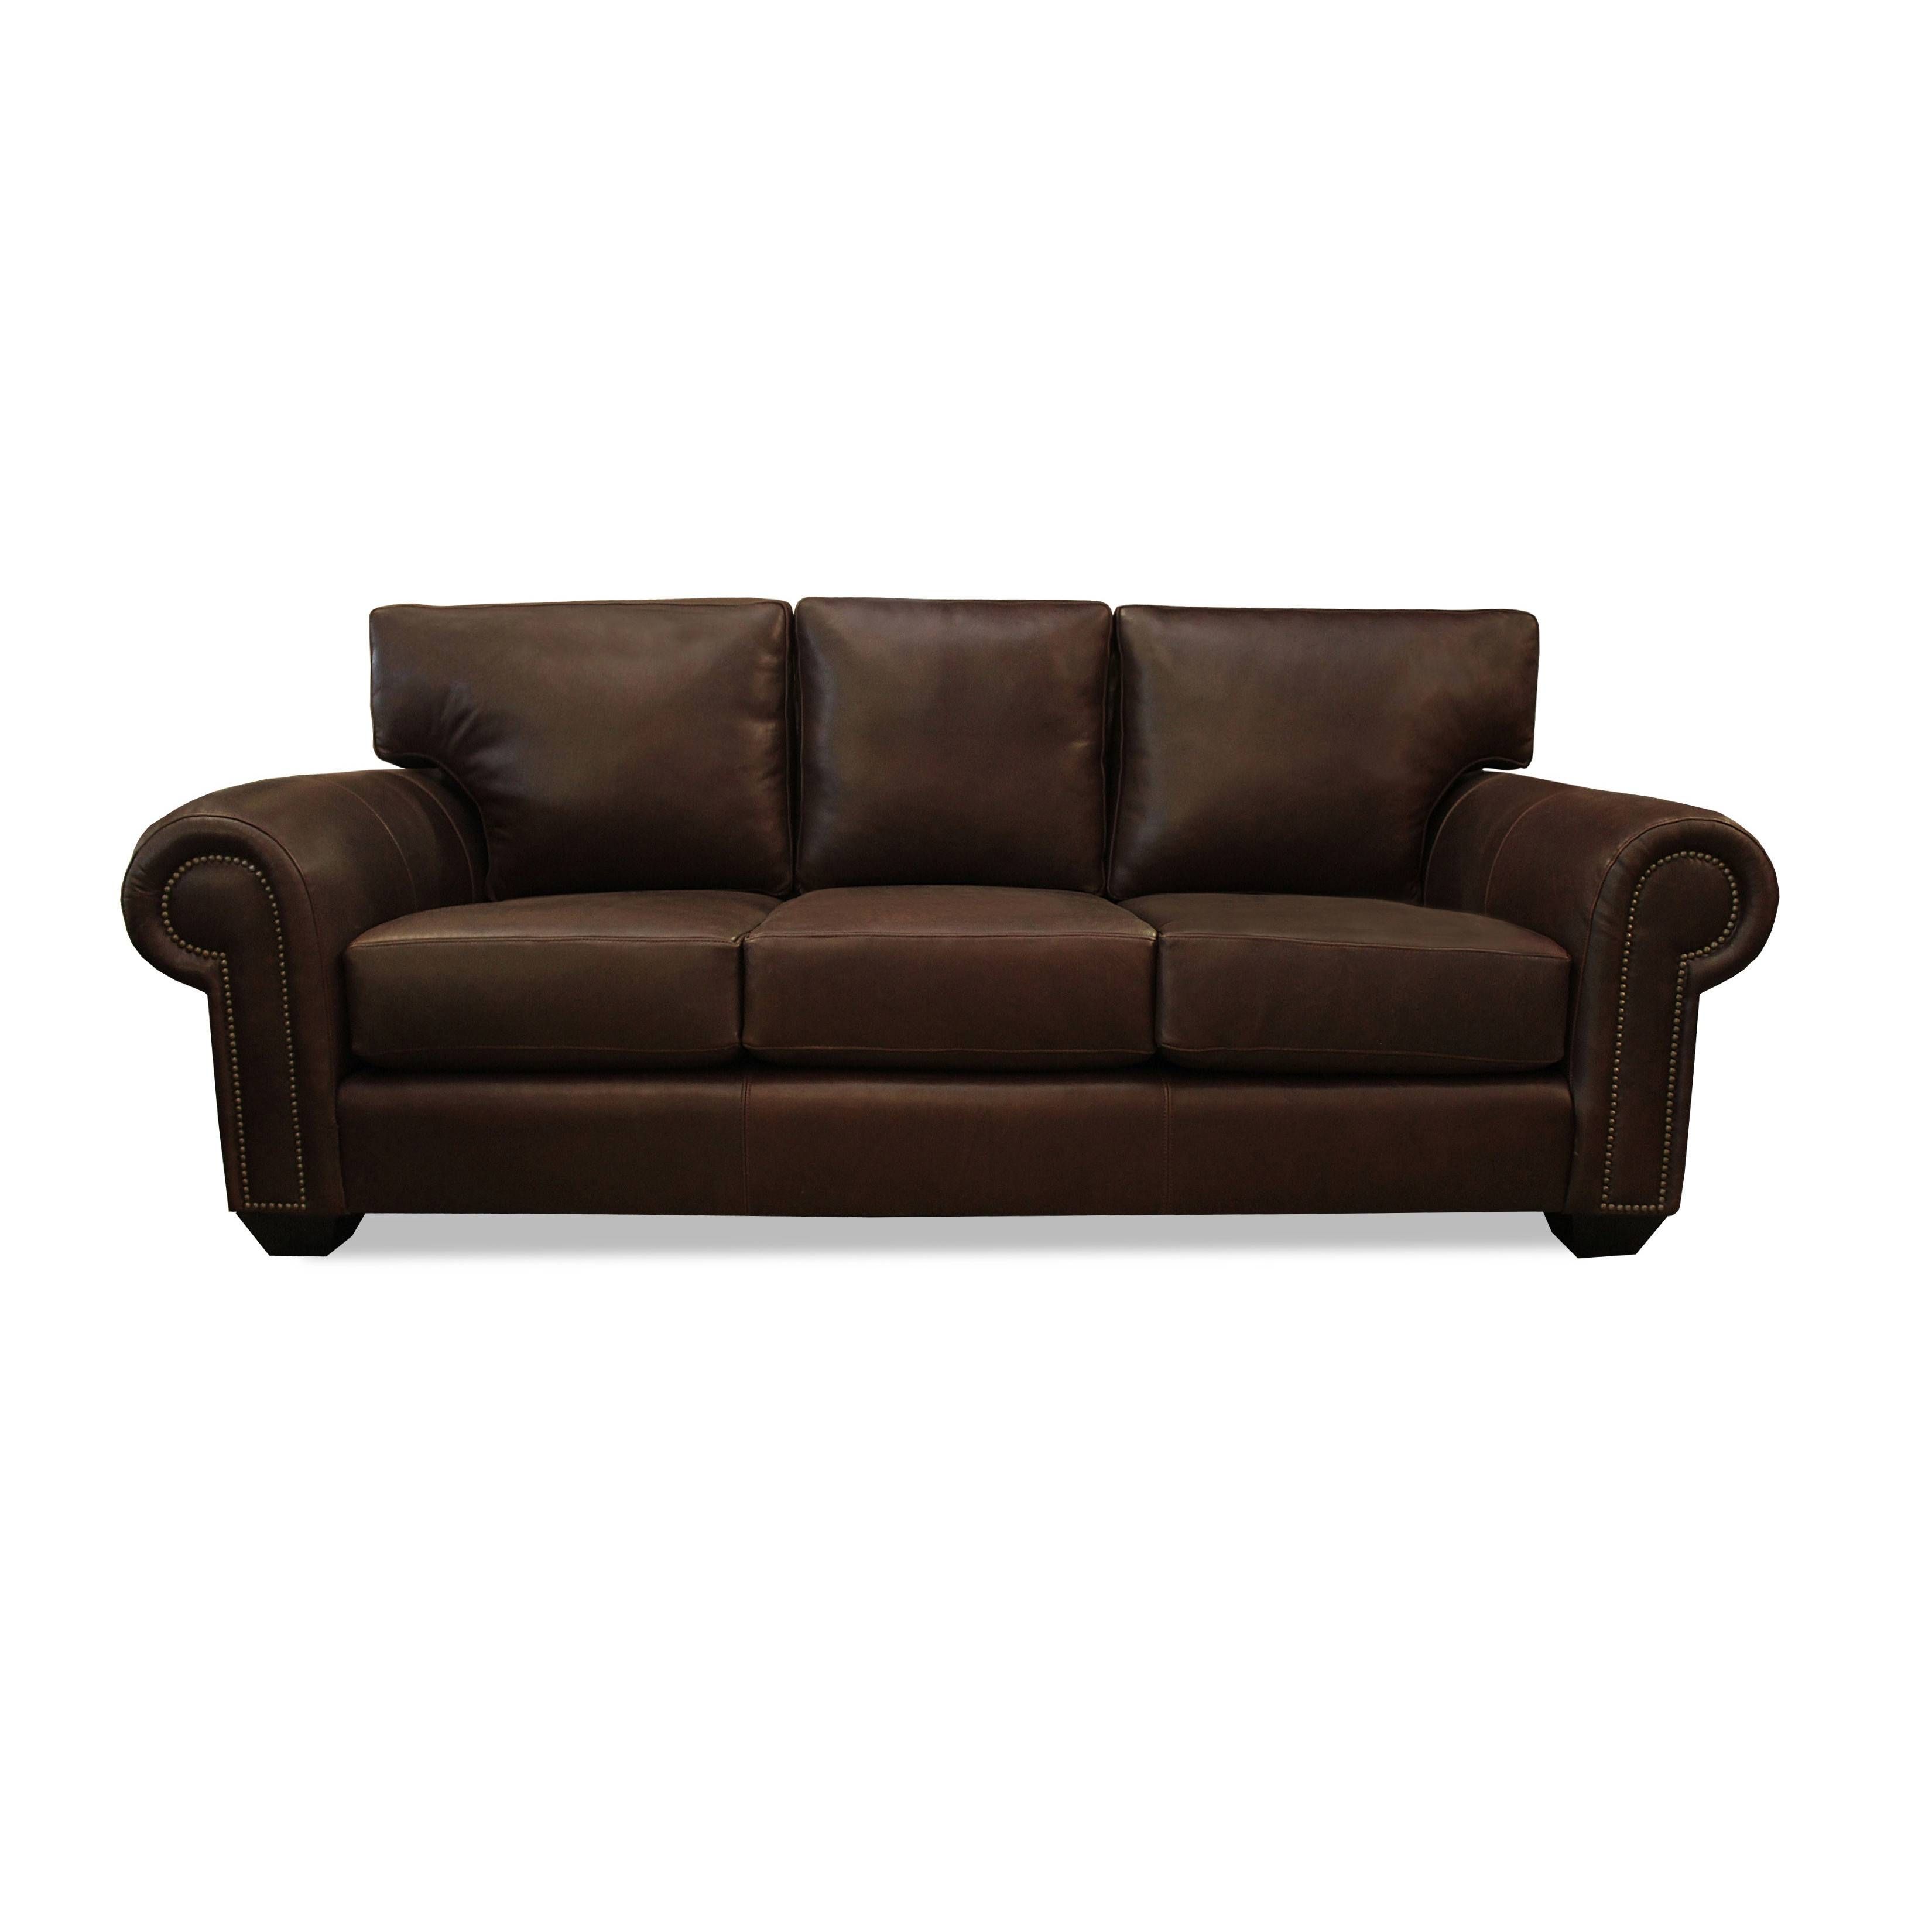 Sofas Manchester Uk | Goodca Sofa With Regard To Manchester Sofas (View 9 of 30)